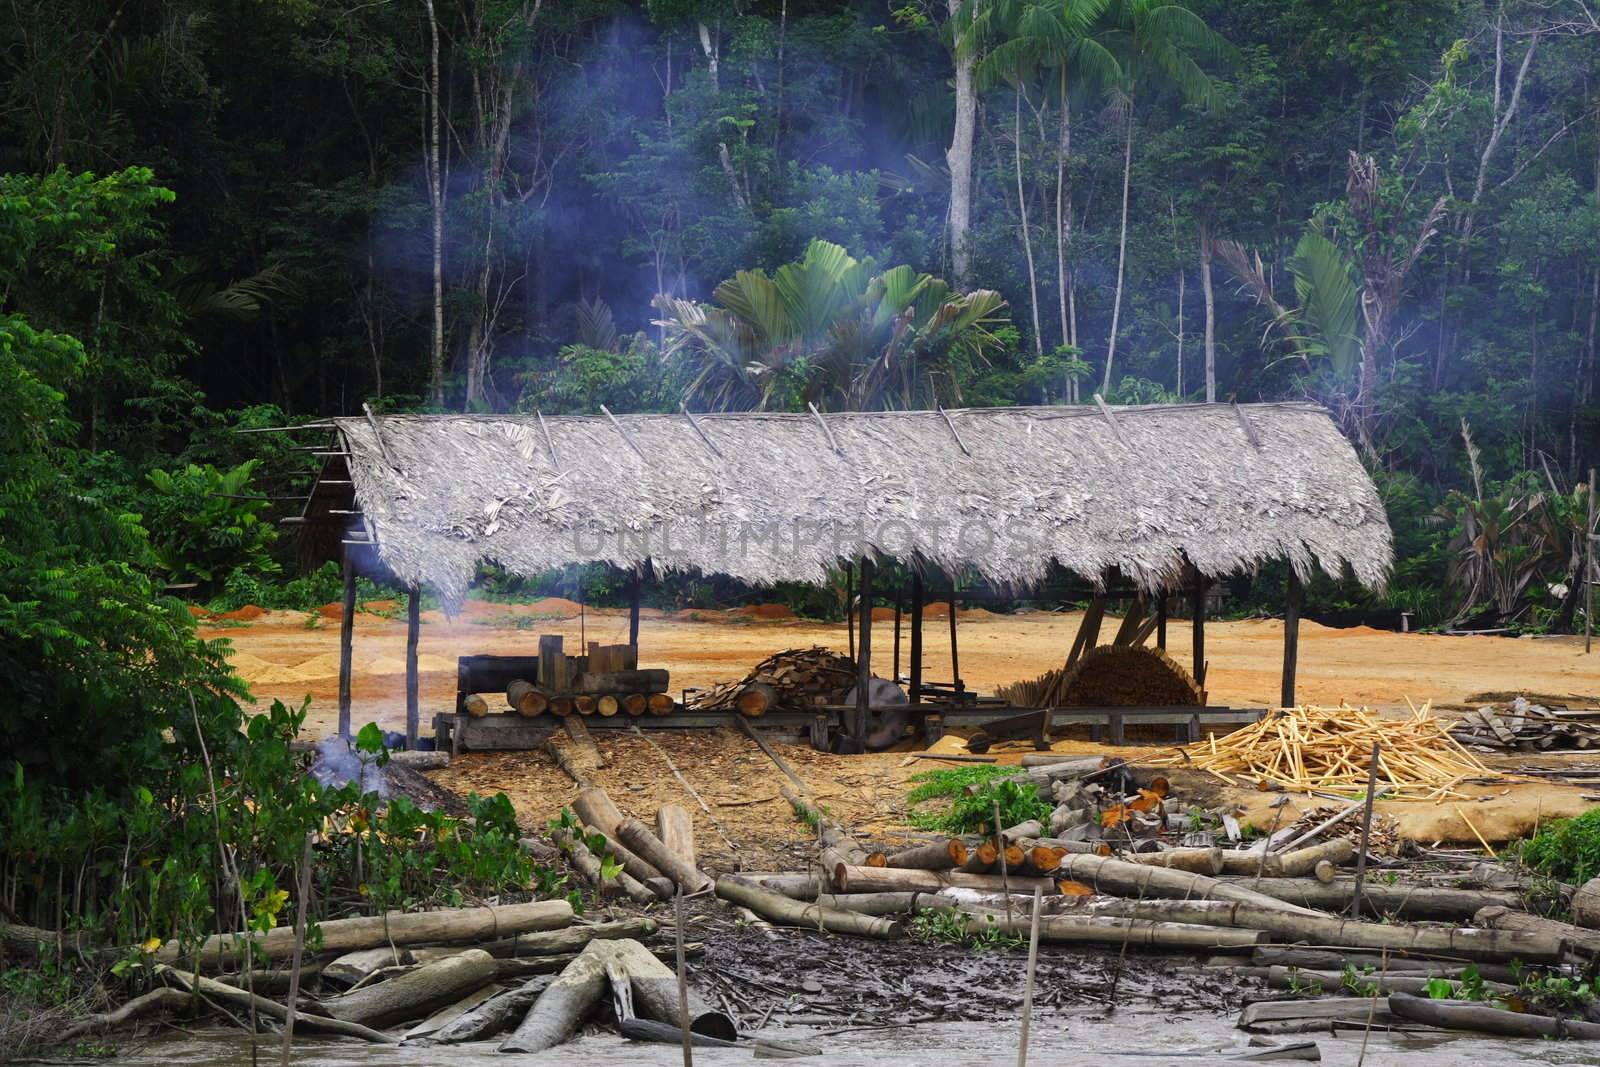 This hut was found on the edge of the Amazon river and is used as a storage and processing place for cutting down the trees!